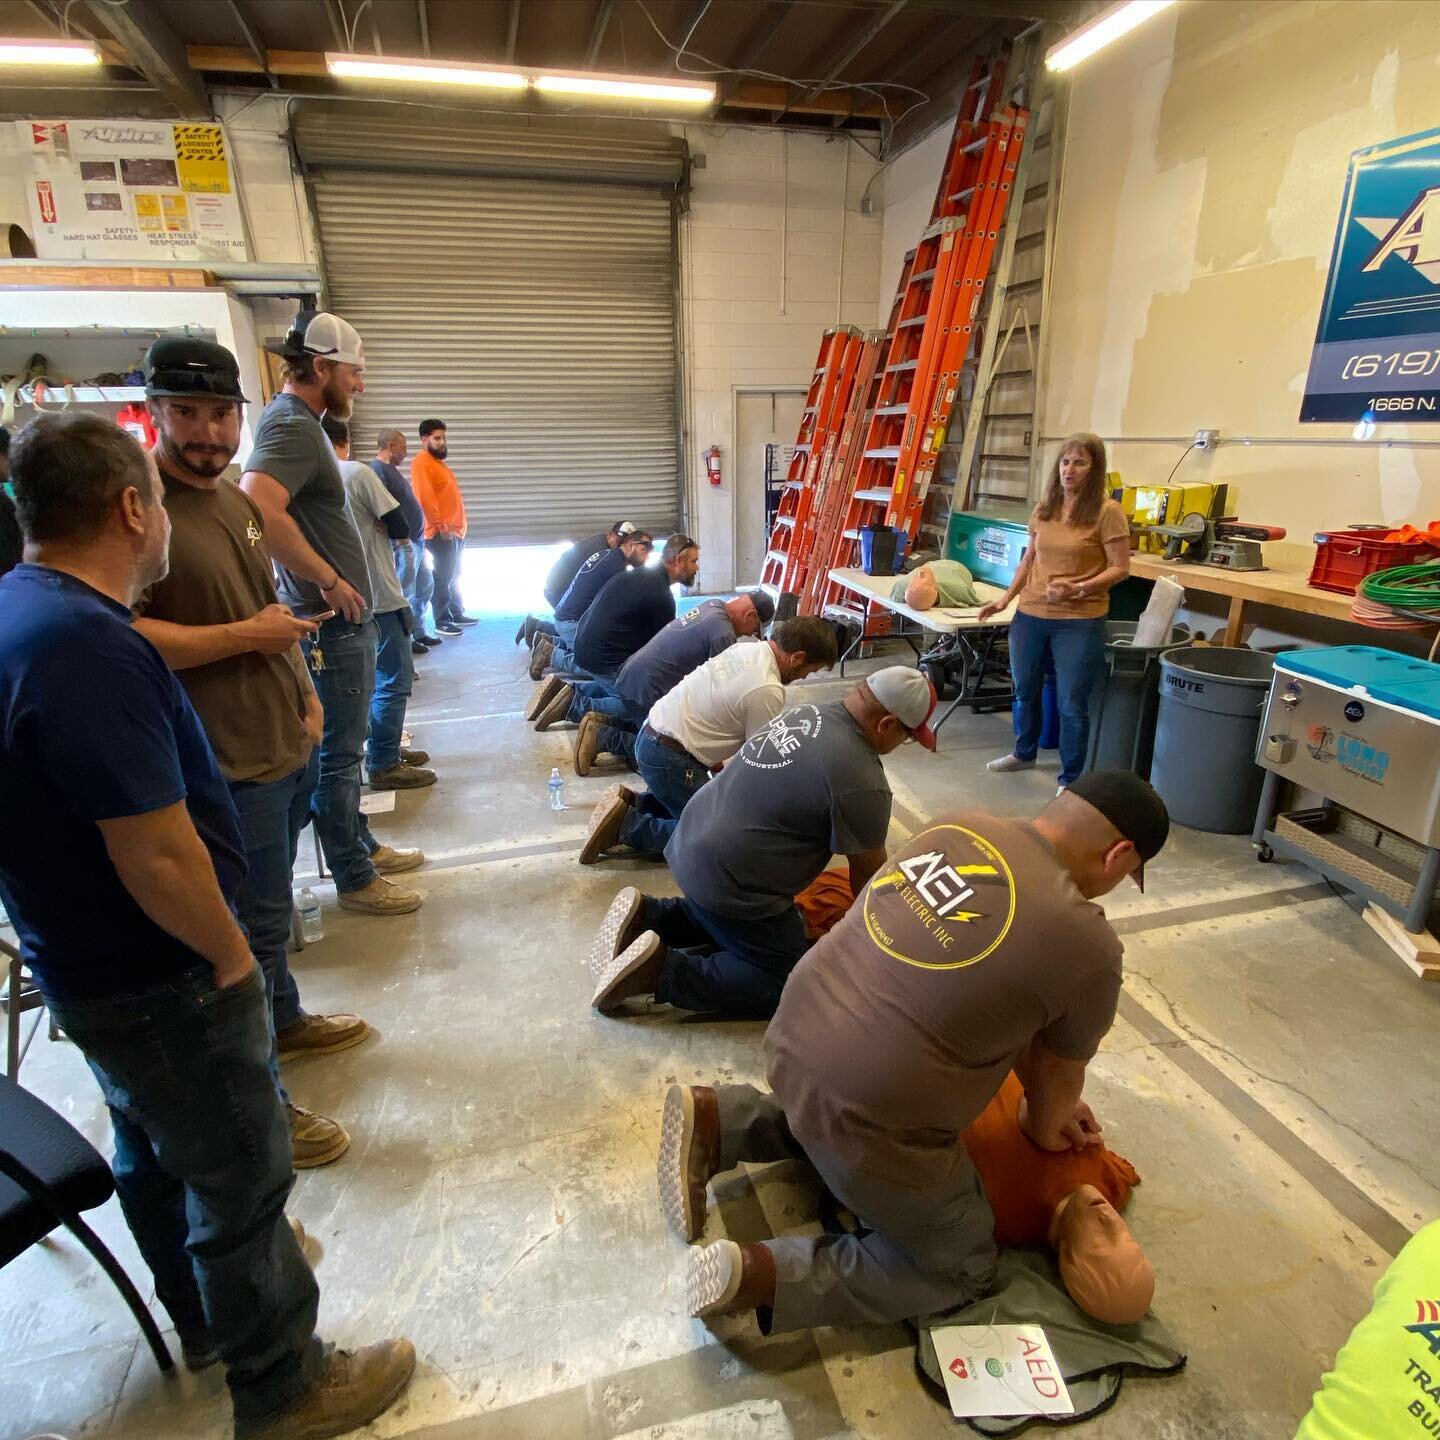 Alpine Electric CPR Class. All of our guys are CPR trained. We are ready for anything. #electricians